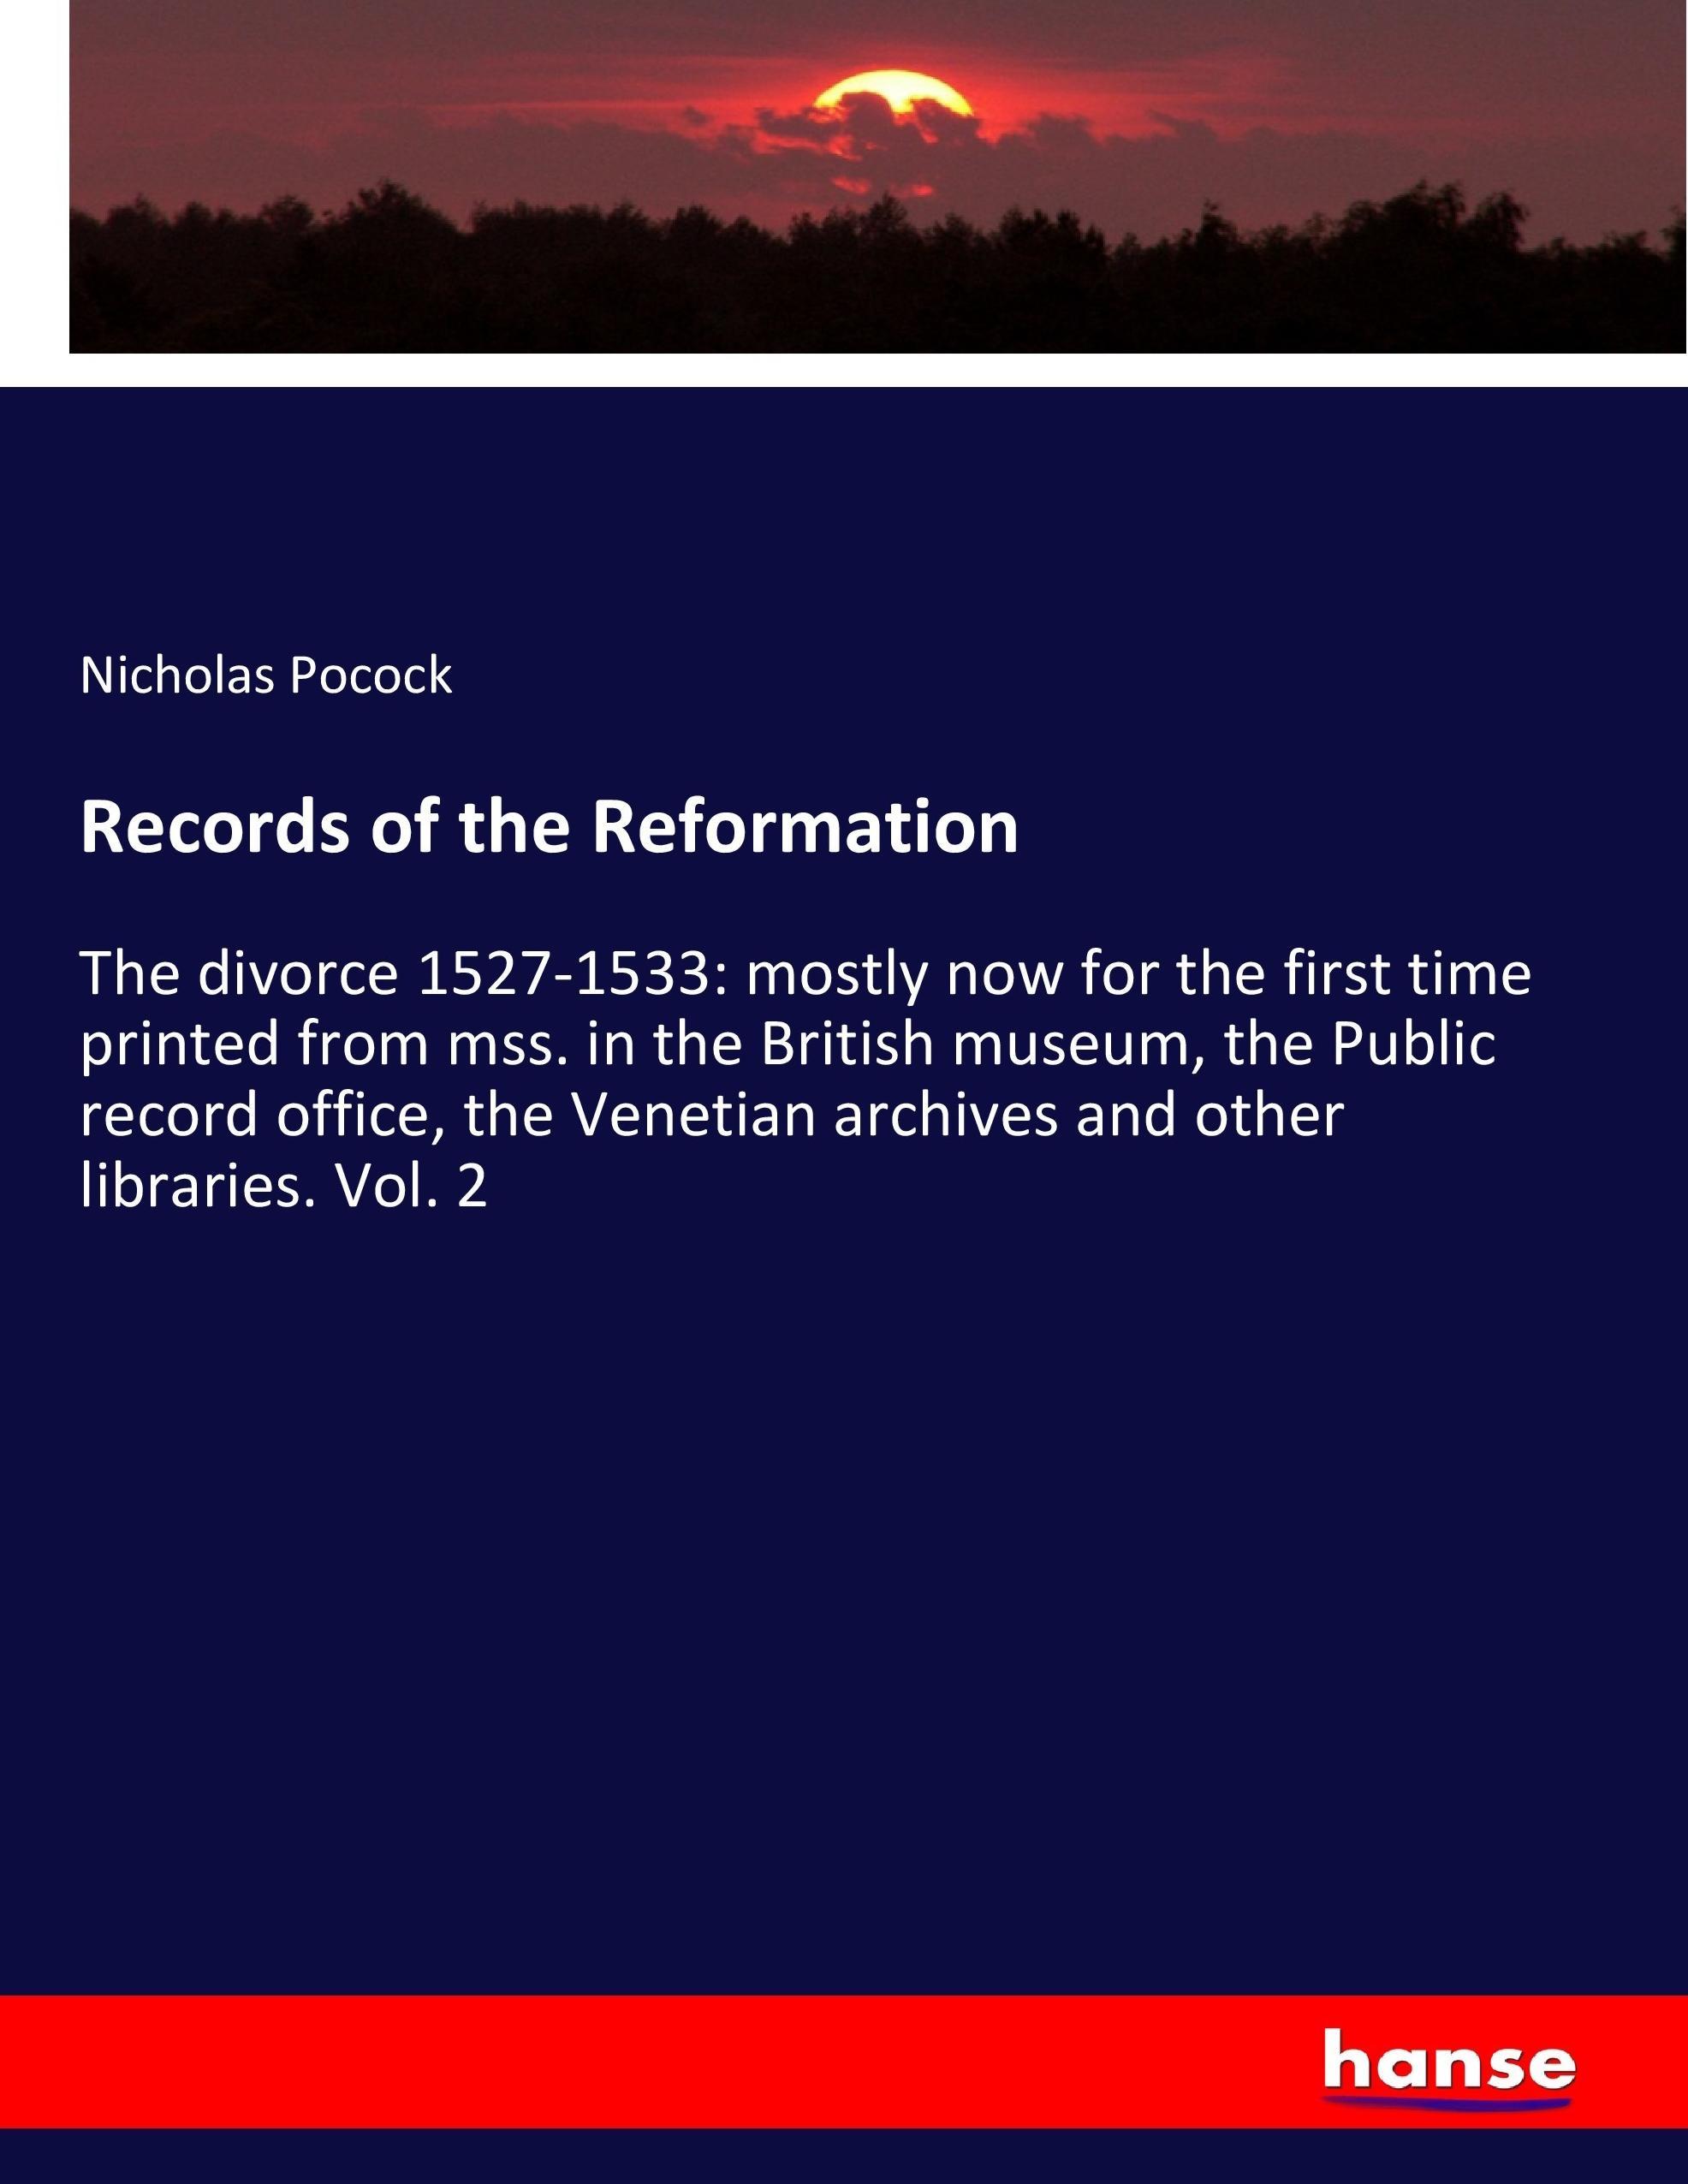 Records of the Reformation / The divorce 1527-1533: mostly now for the first time printed from mss. in the British museum, the Public record office, the Venetian archives and other libraries. Vol. 2 - Pocock, Nicholas